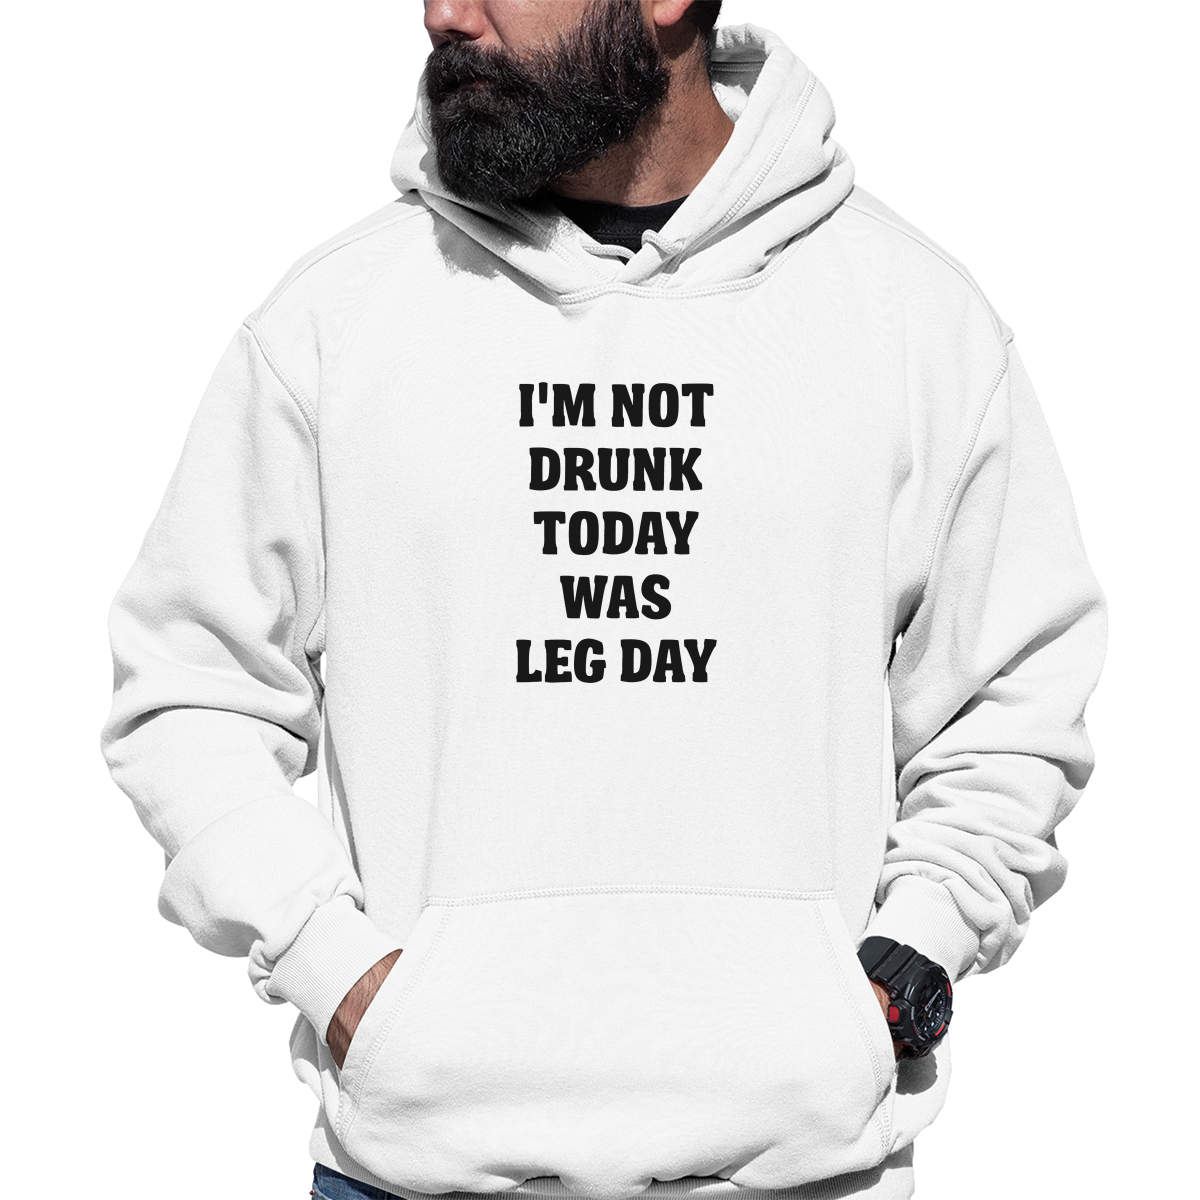 I'm Not Drunk Today Was Leg Day Unisex Hoodie | White